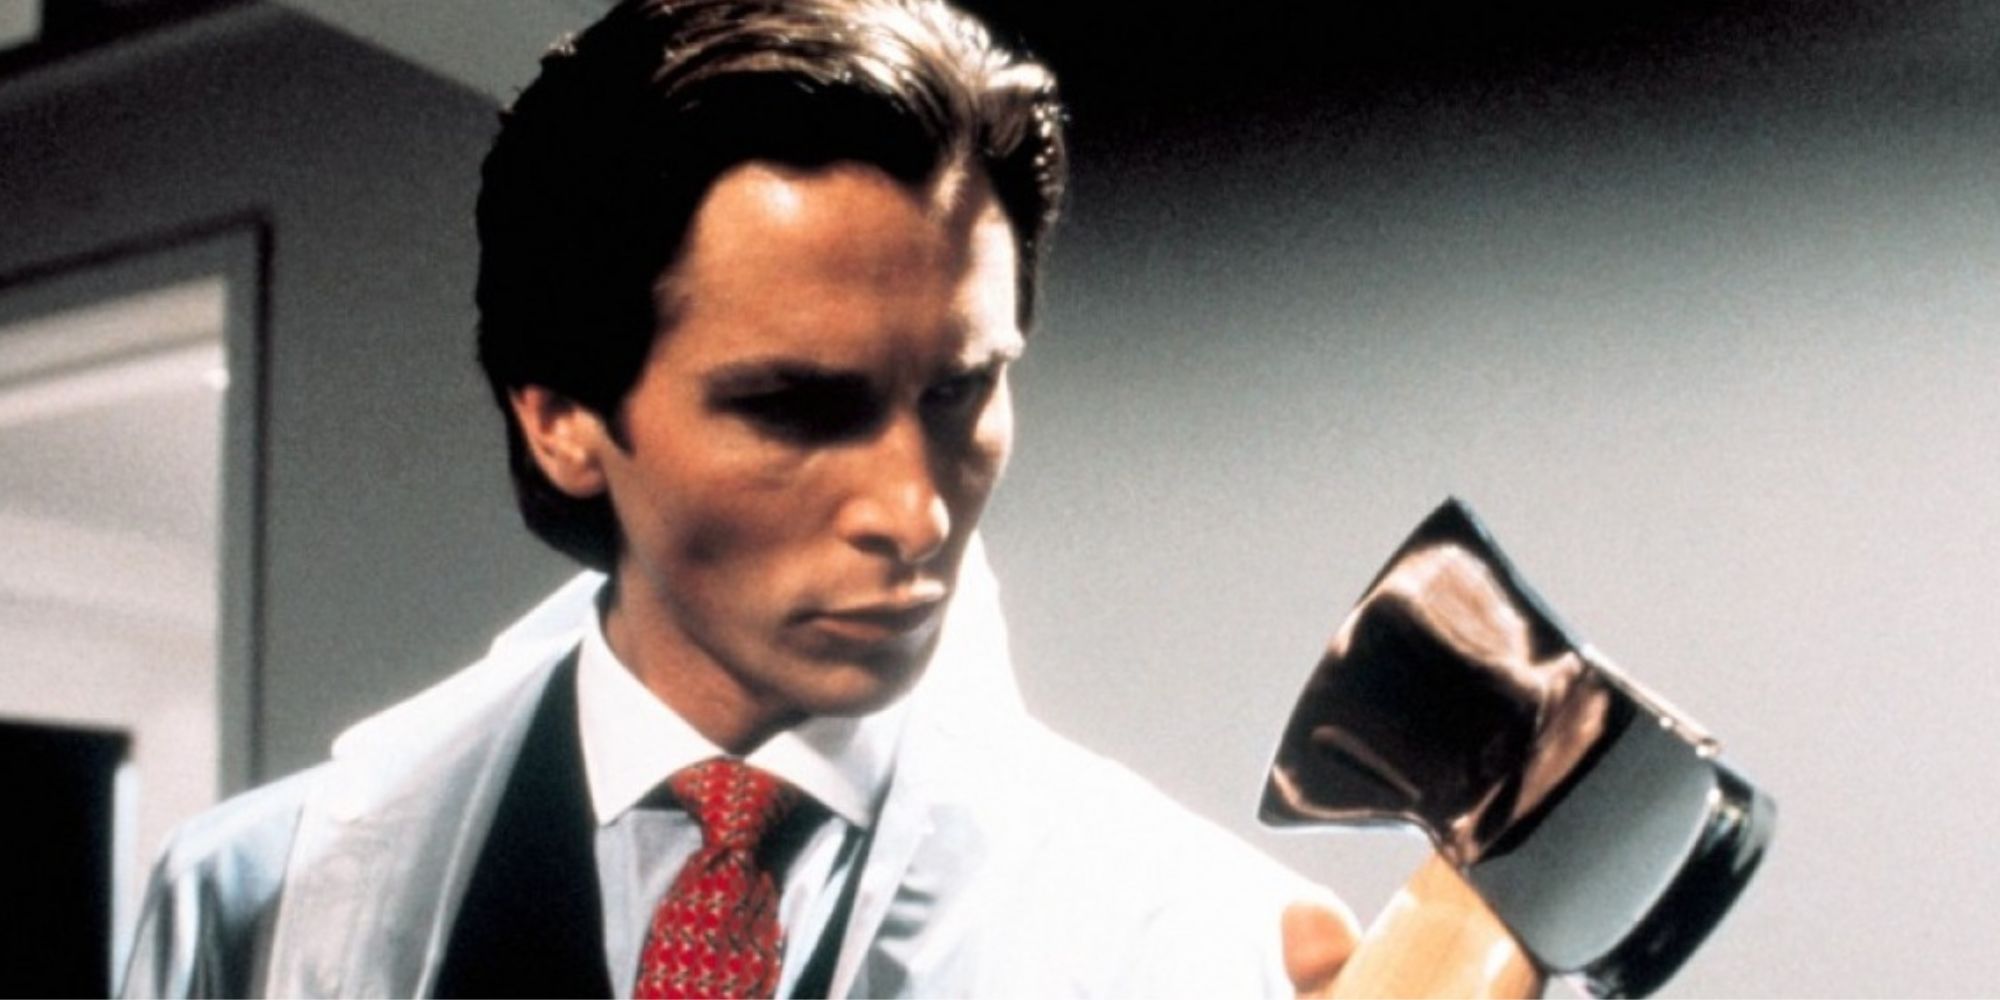 Christian Bale as an axeman in 'American Psycho'